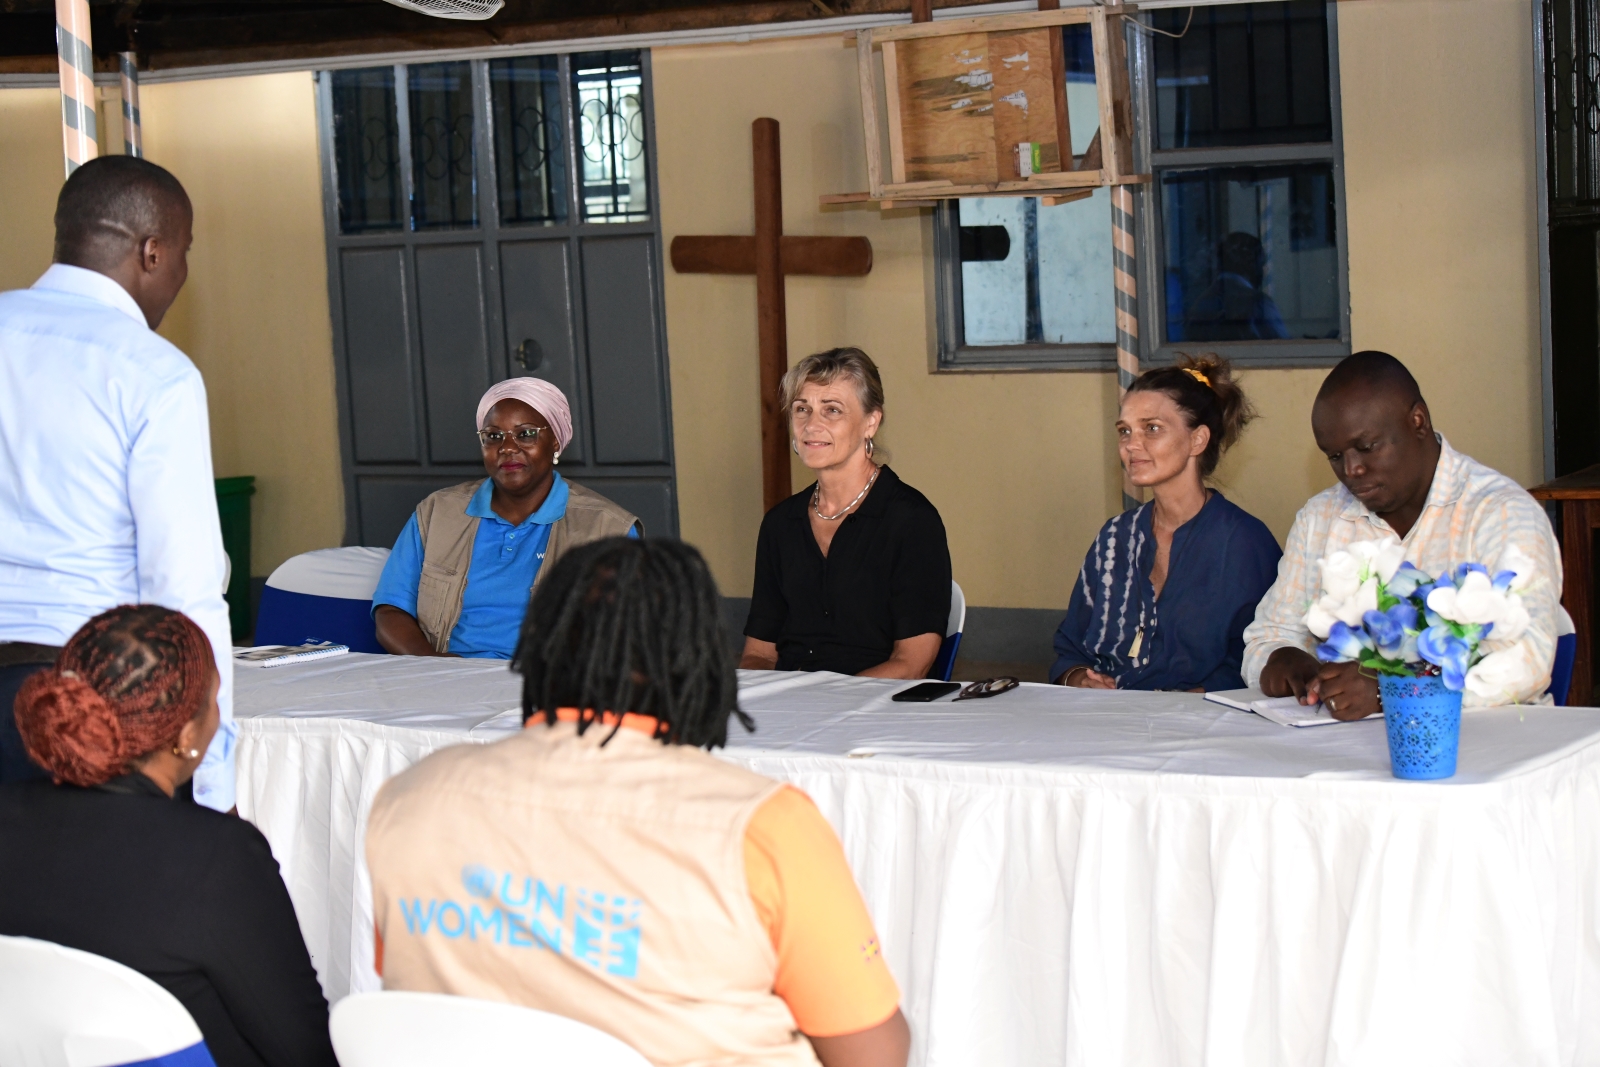 Ambassador Hermansen, being briefed about the second chance education component of the LEAP program at the Ebeneezer Global Hub in Yumbe district. Photo: UN Women/Samuel Wamuttu  ​